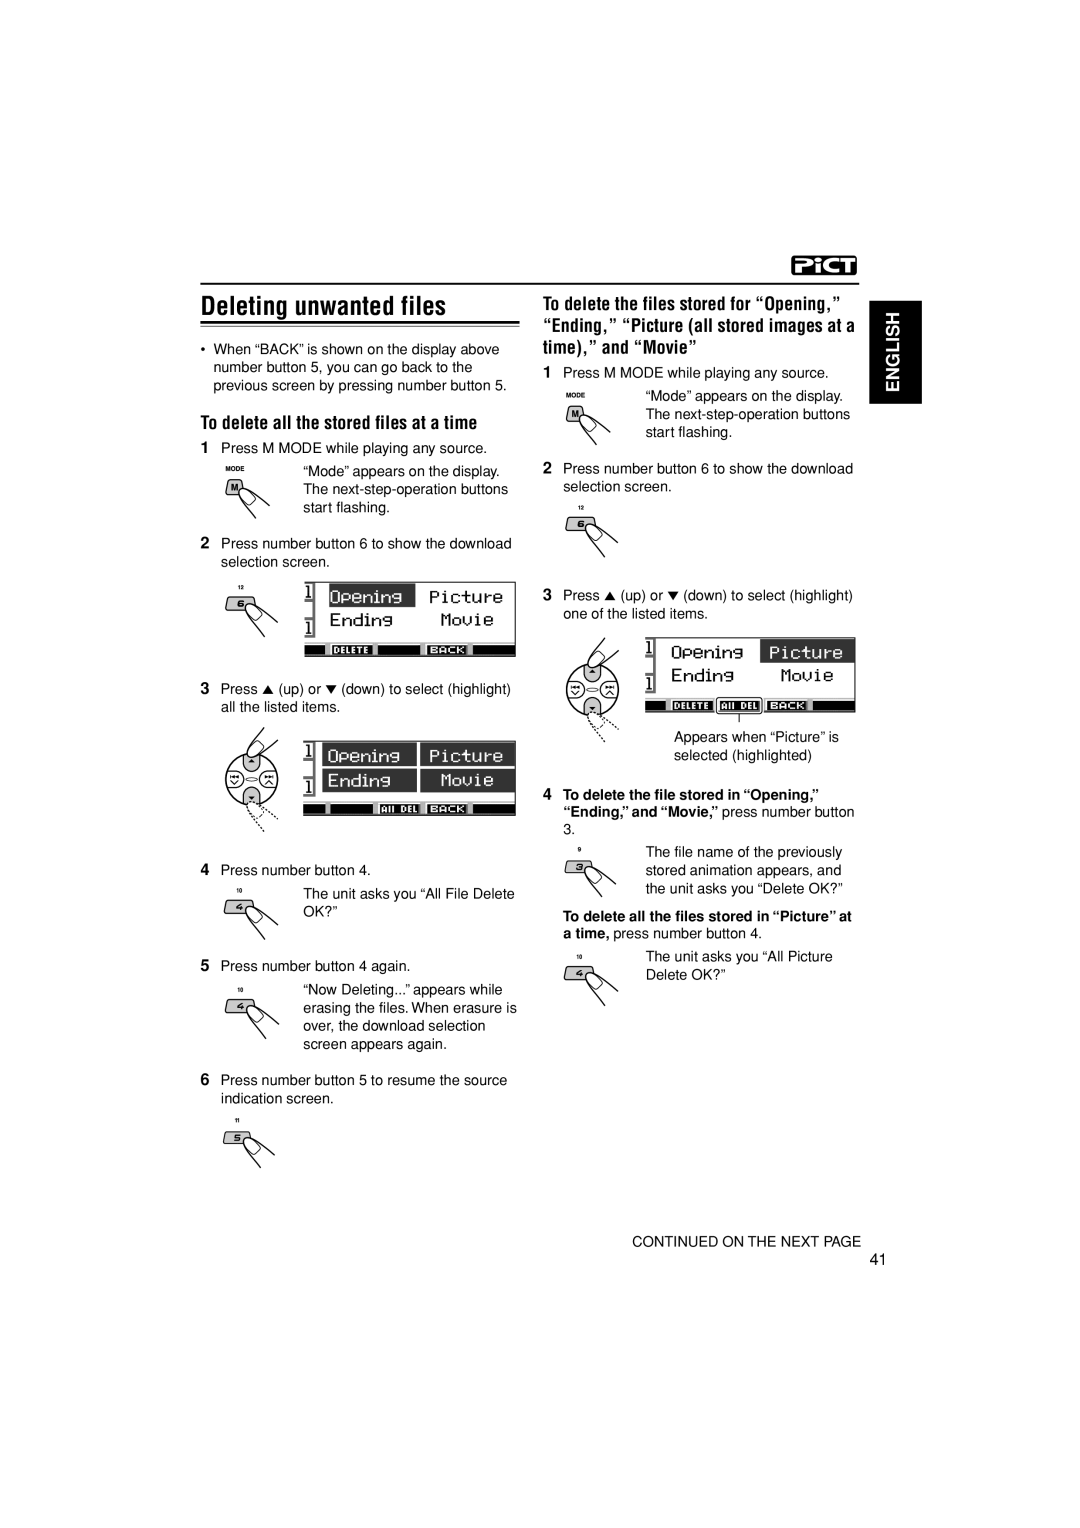 JVC KD-LH401 service manual Deleting unwanted files, To delete all the stored files at a time, time,” and “Movie” 